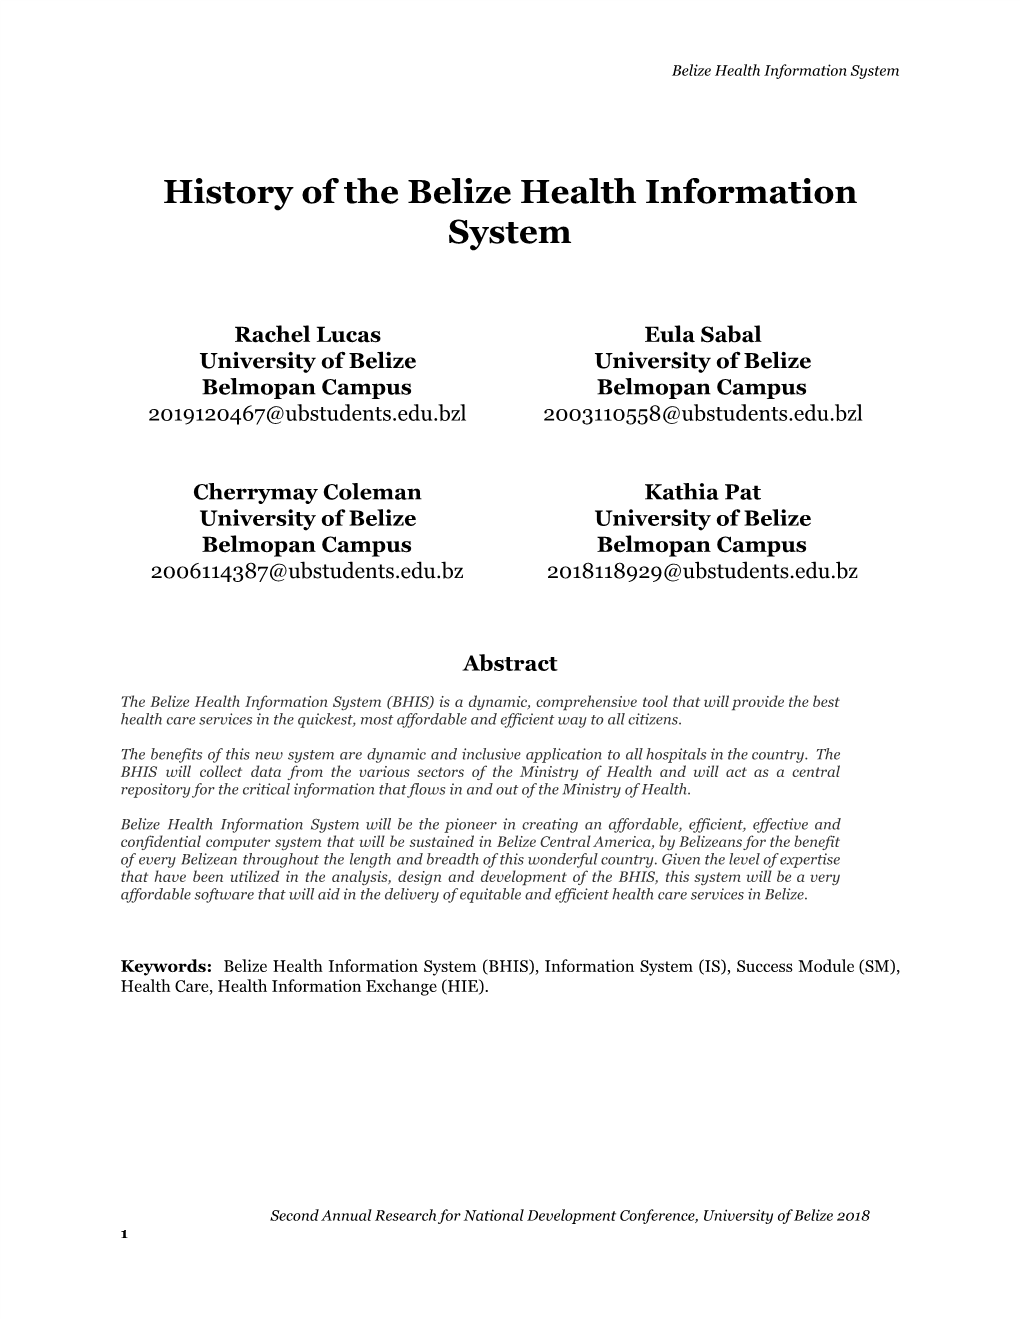 History of the Belize Health Information System